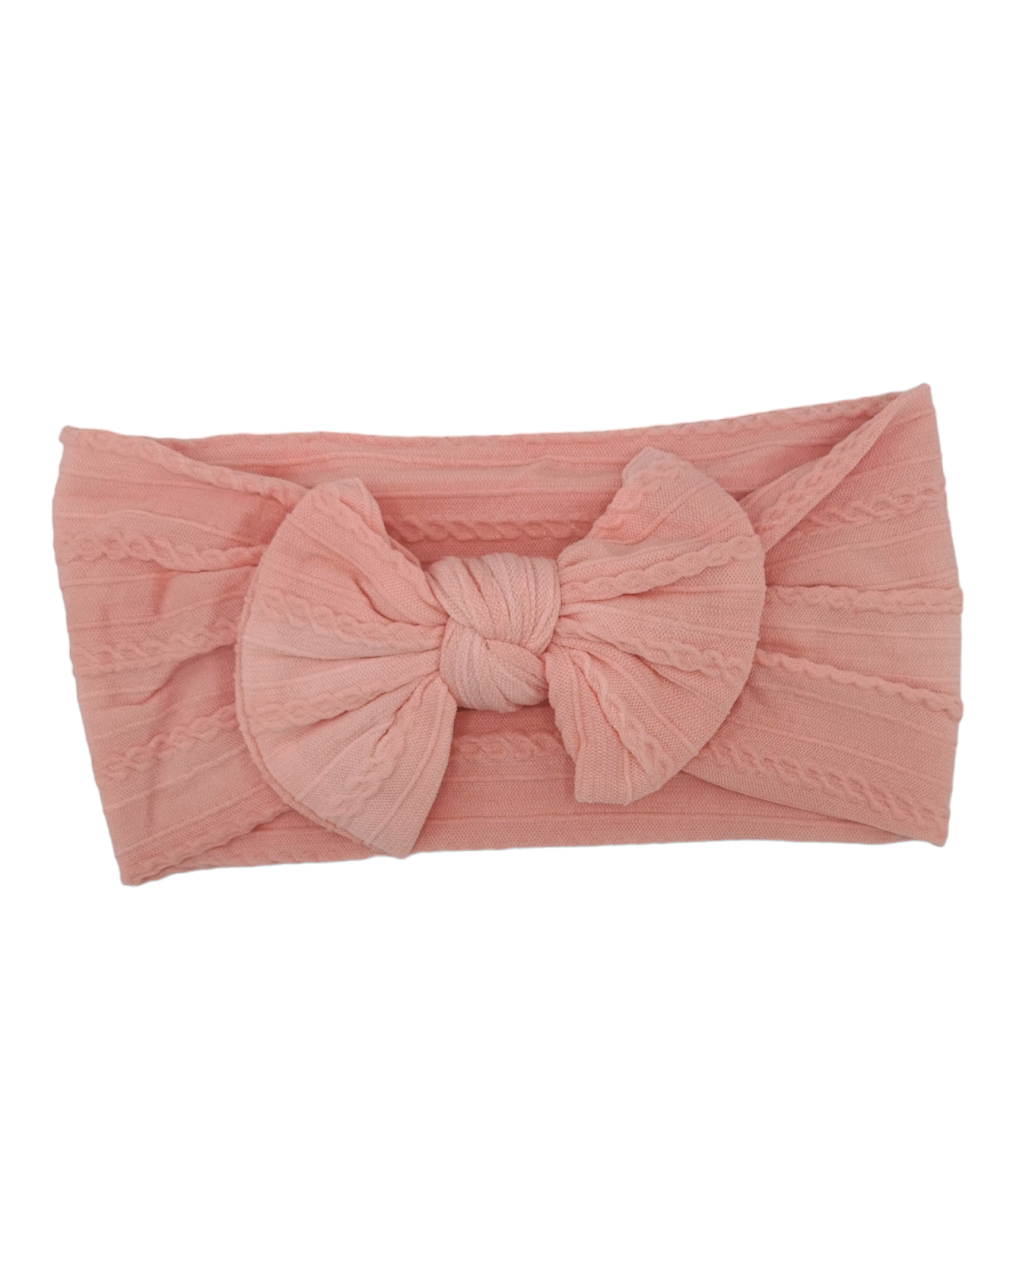 Adult Size - Pink Bow Cable Knit Headwrap - Betty Brown Boutique Ltd